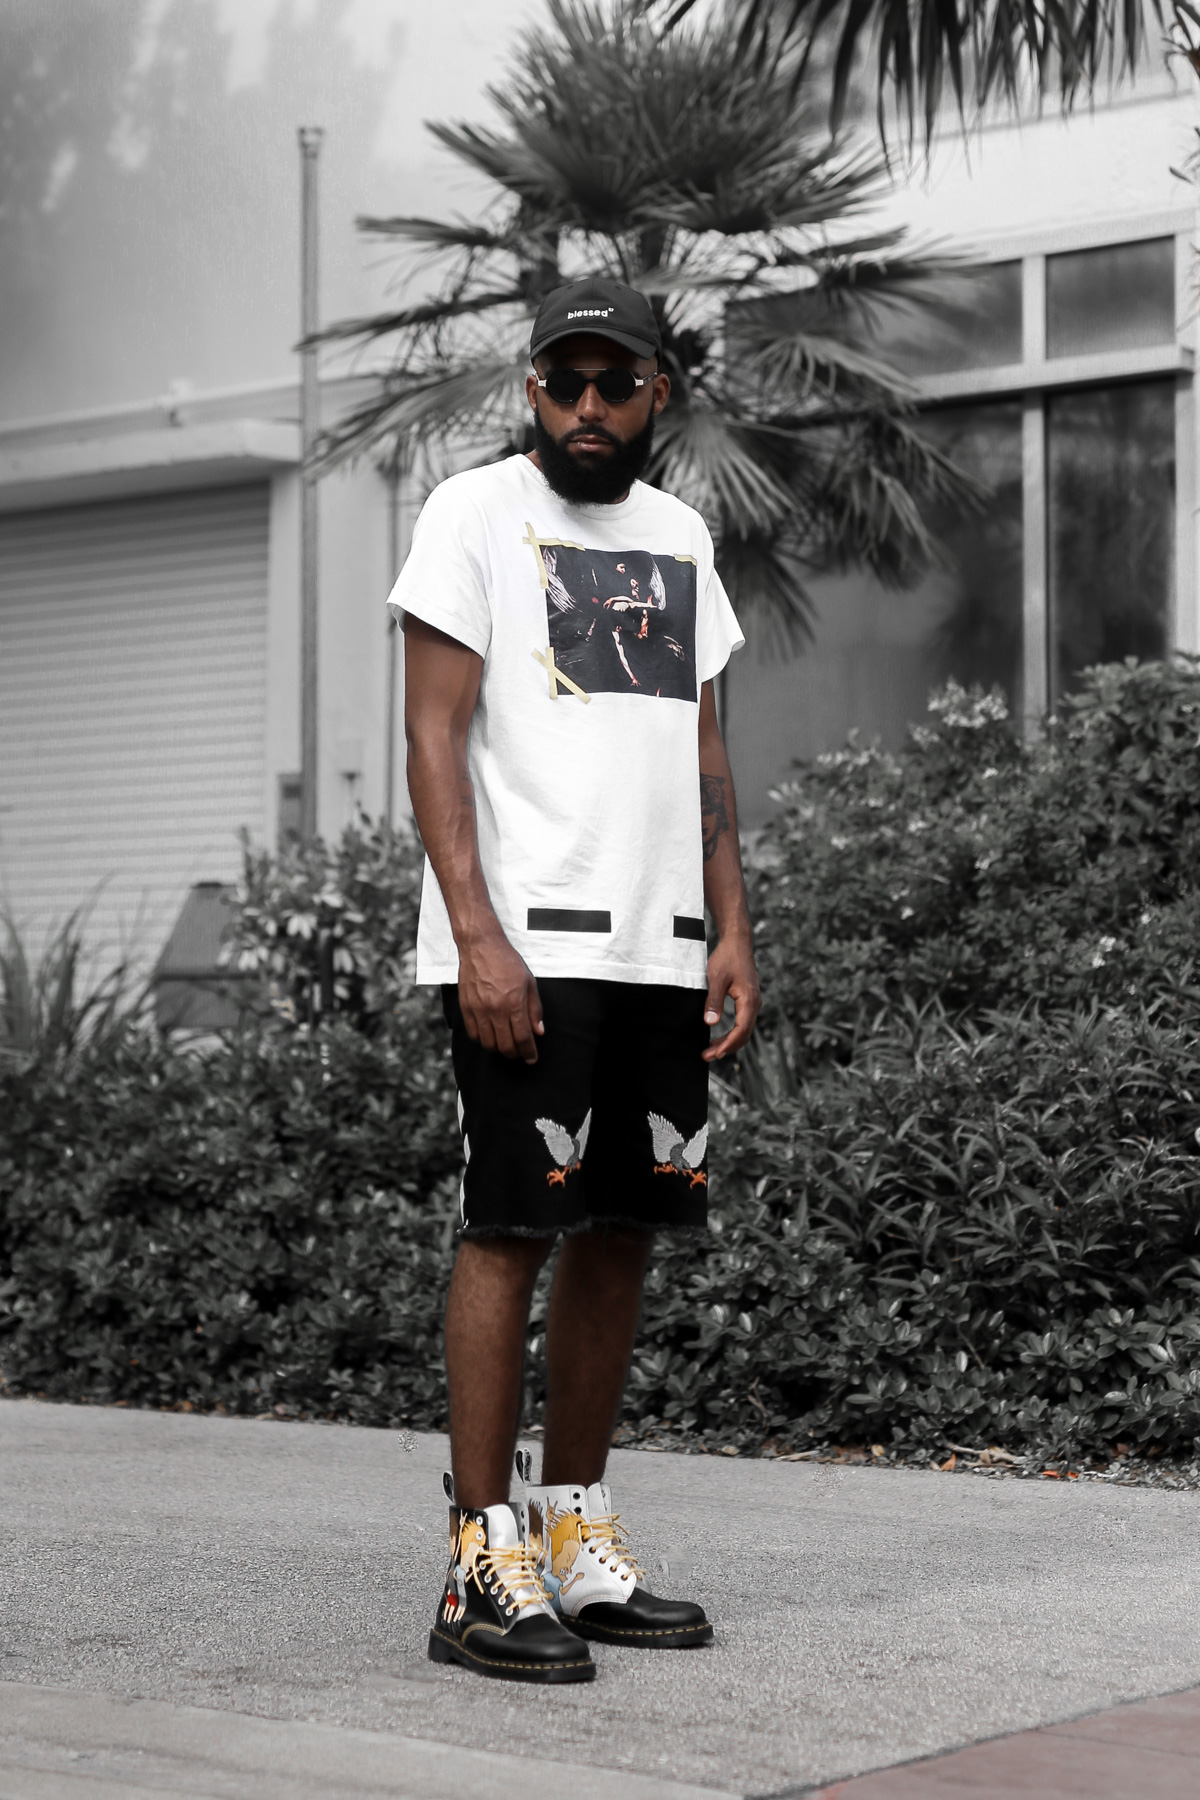 Street Style at Miami Beach with Jean-Claude Mpassy from New Kiss on the Blog wearing Off-White